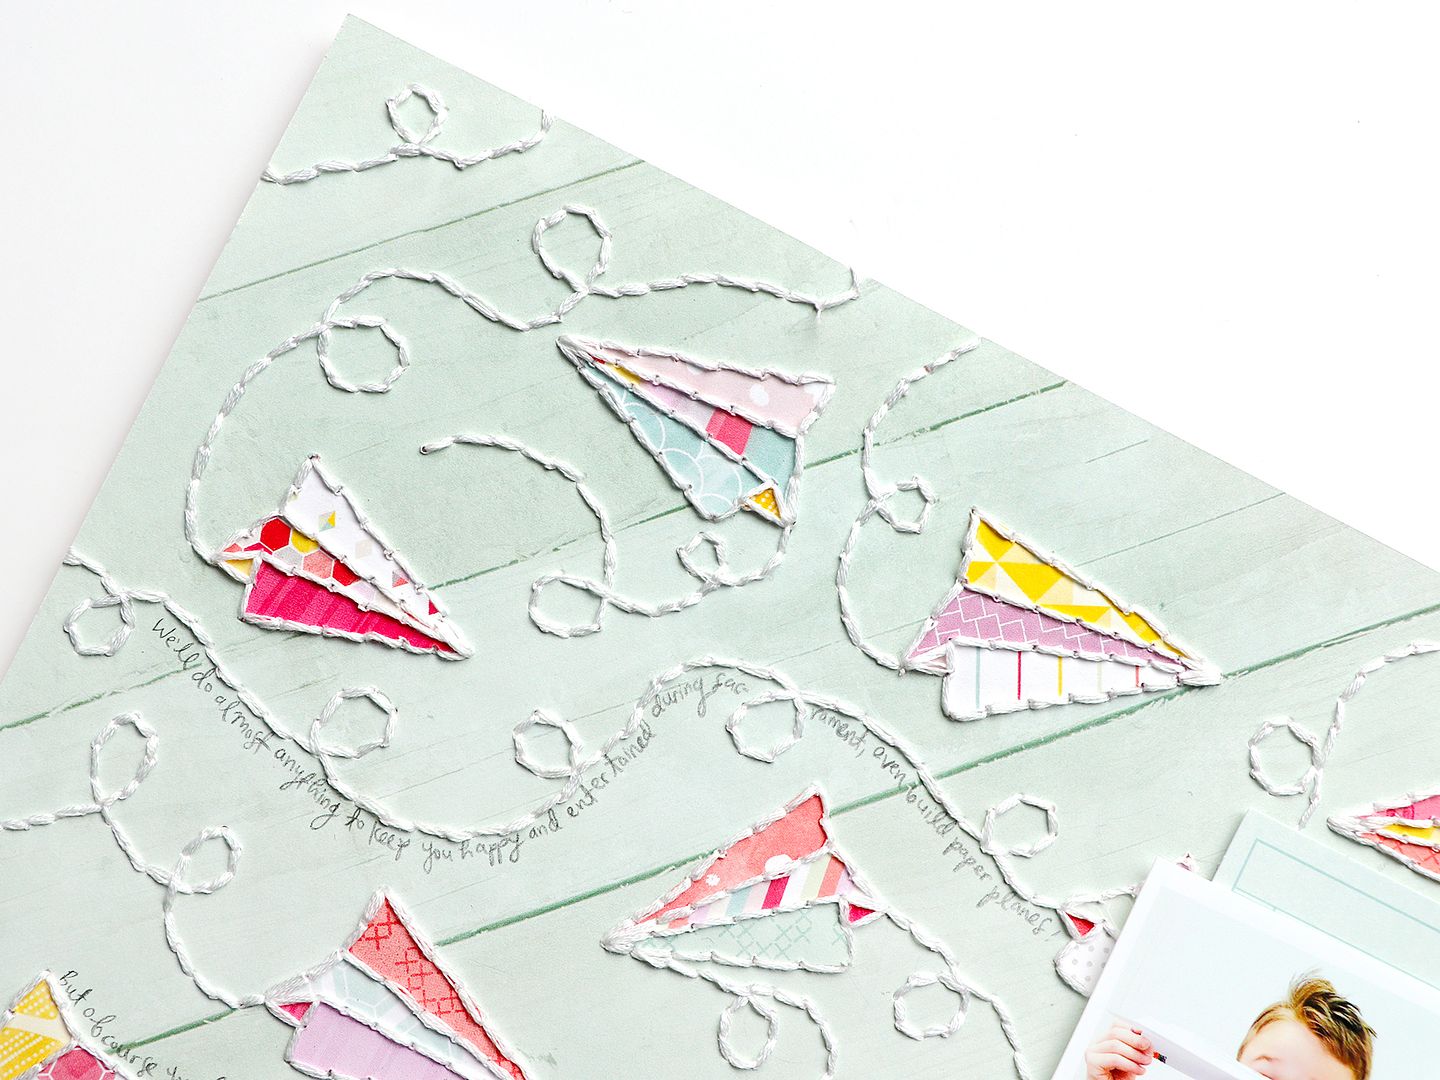  photo Paper Airplane Detail 1 by Paige Evans.jpg